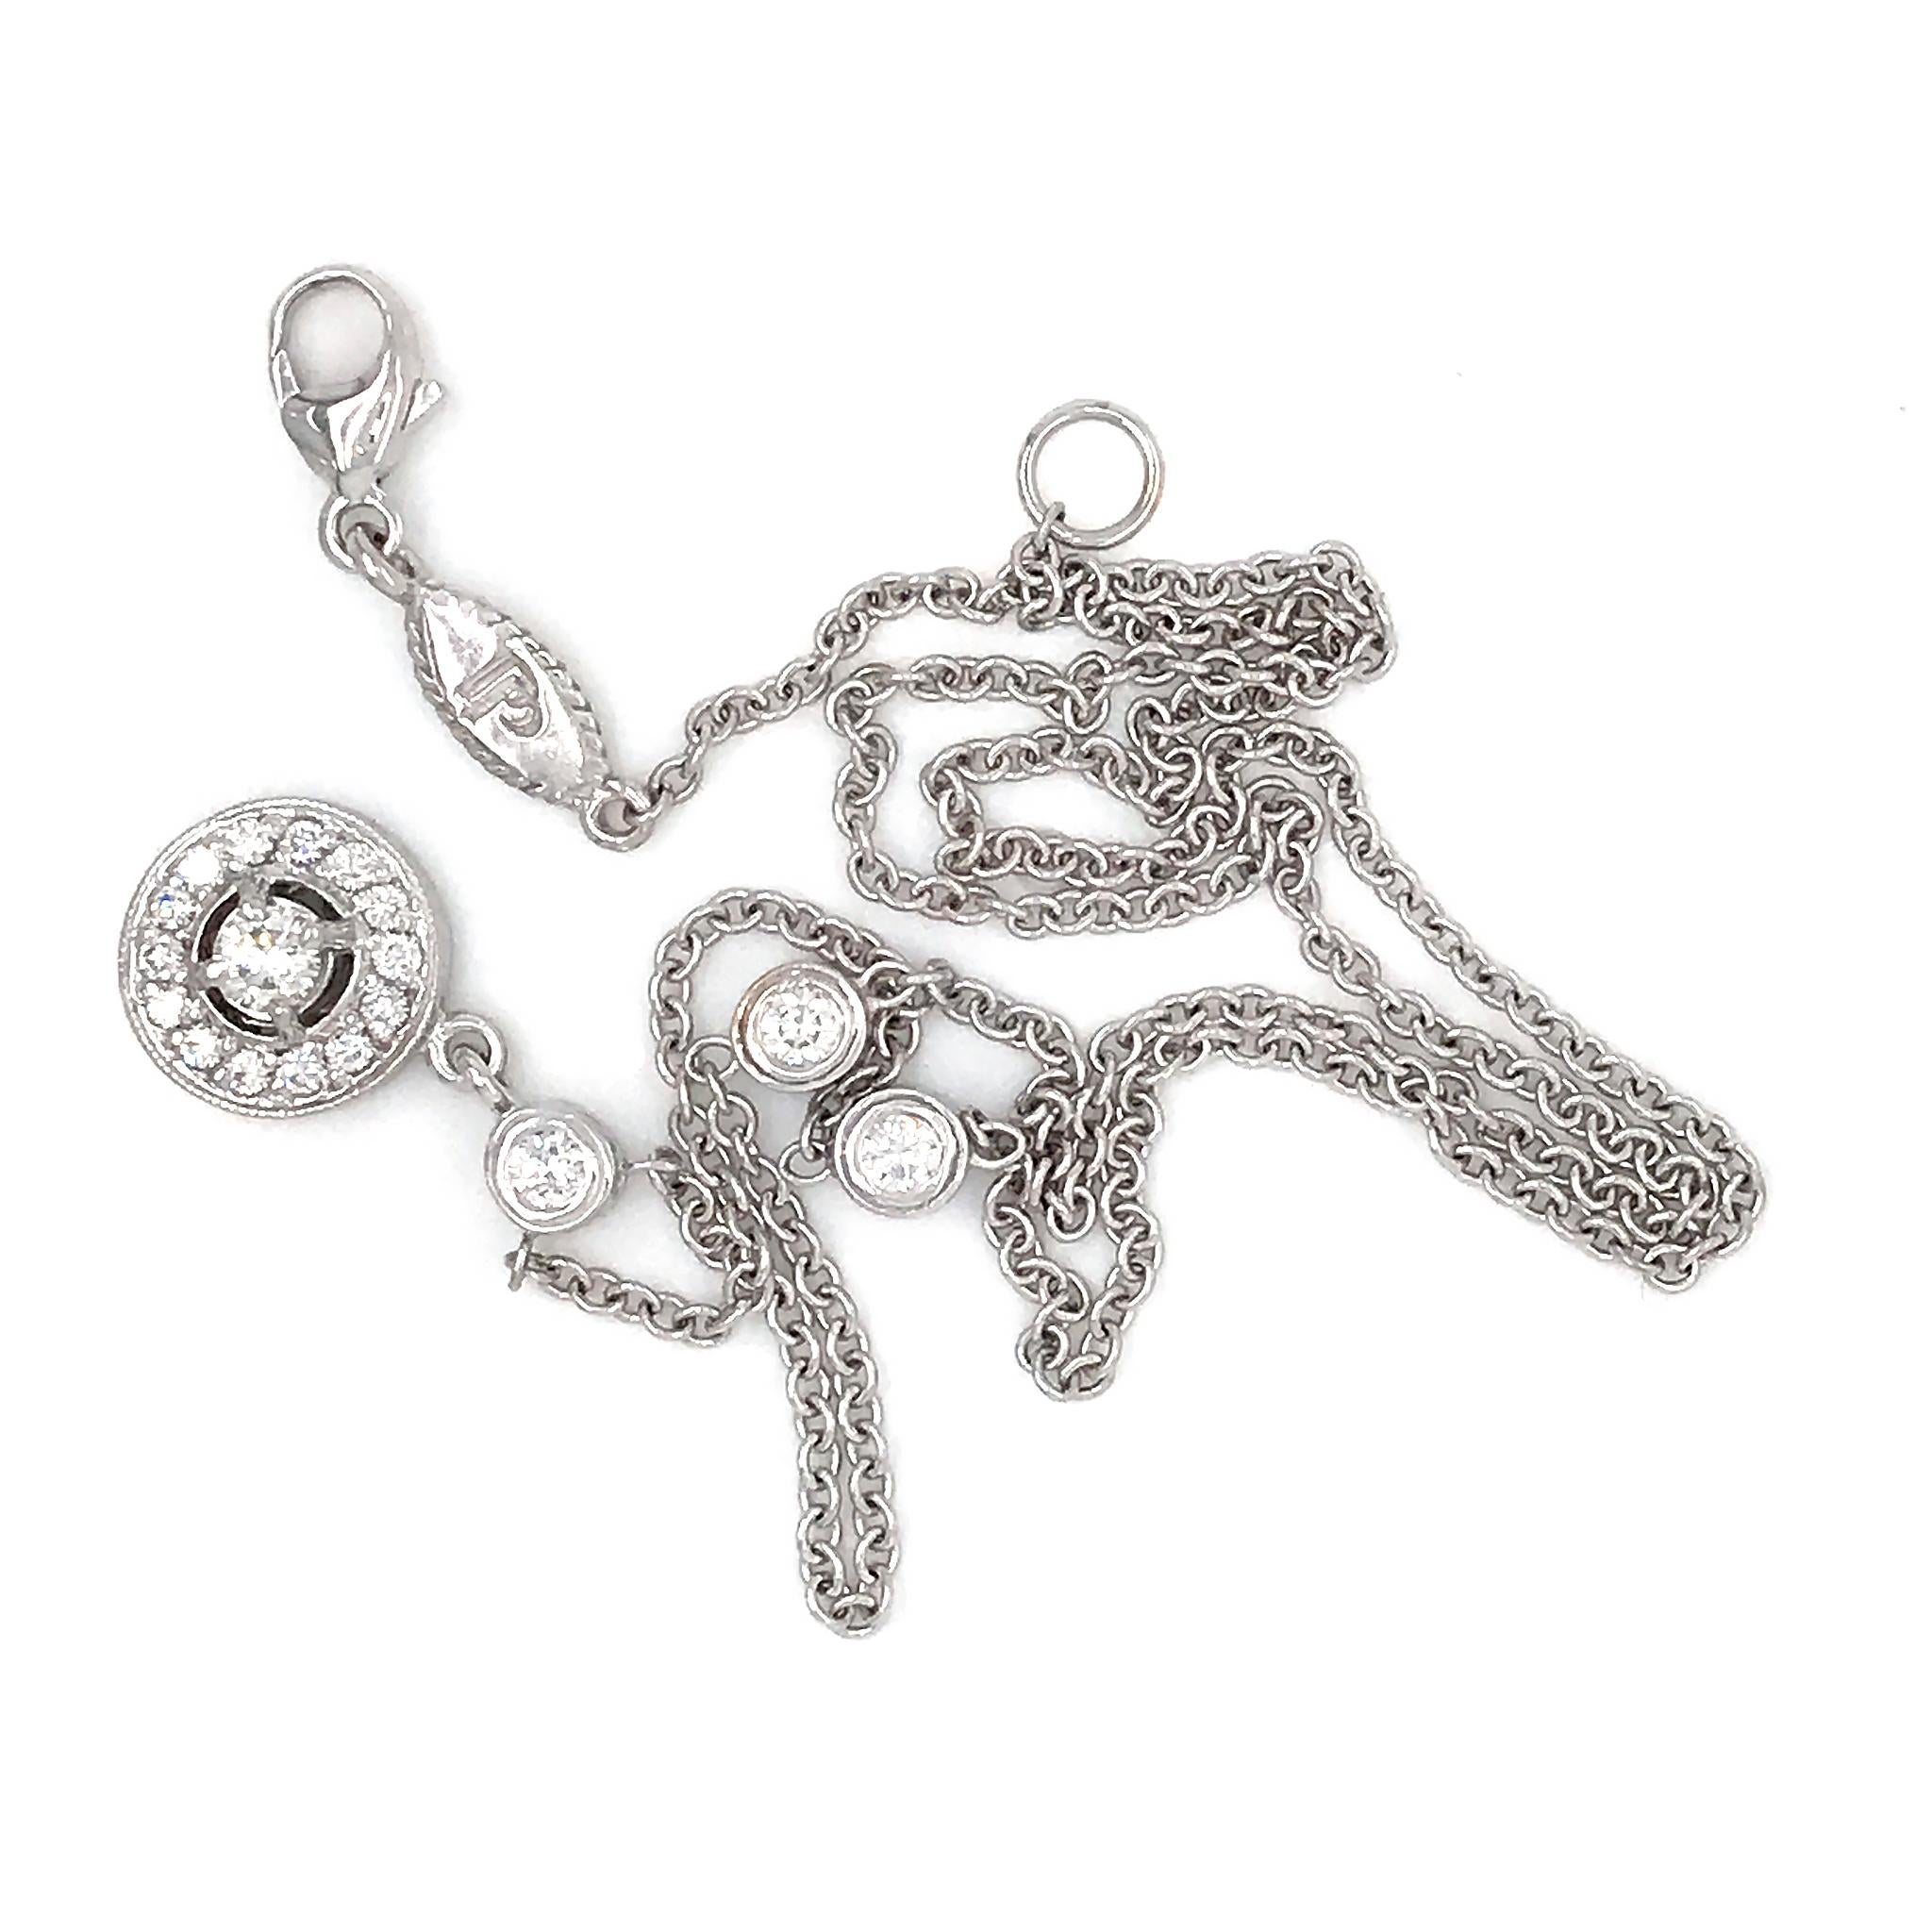 18K White Gold
Diamond: 0.47ct twd (estimated)
Total Weight: 5.3 grams
Chain Length: 15 inches